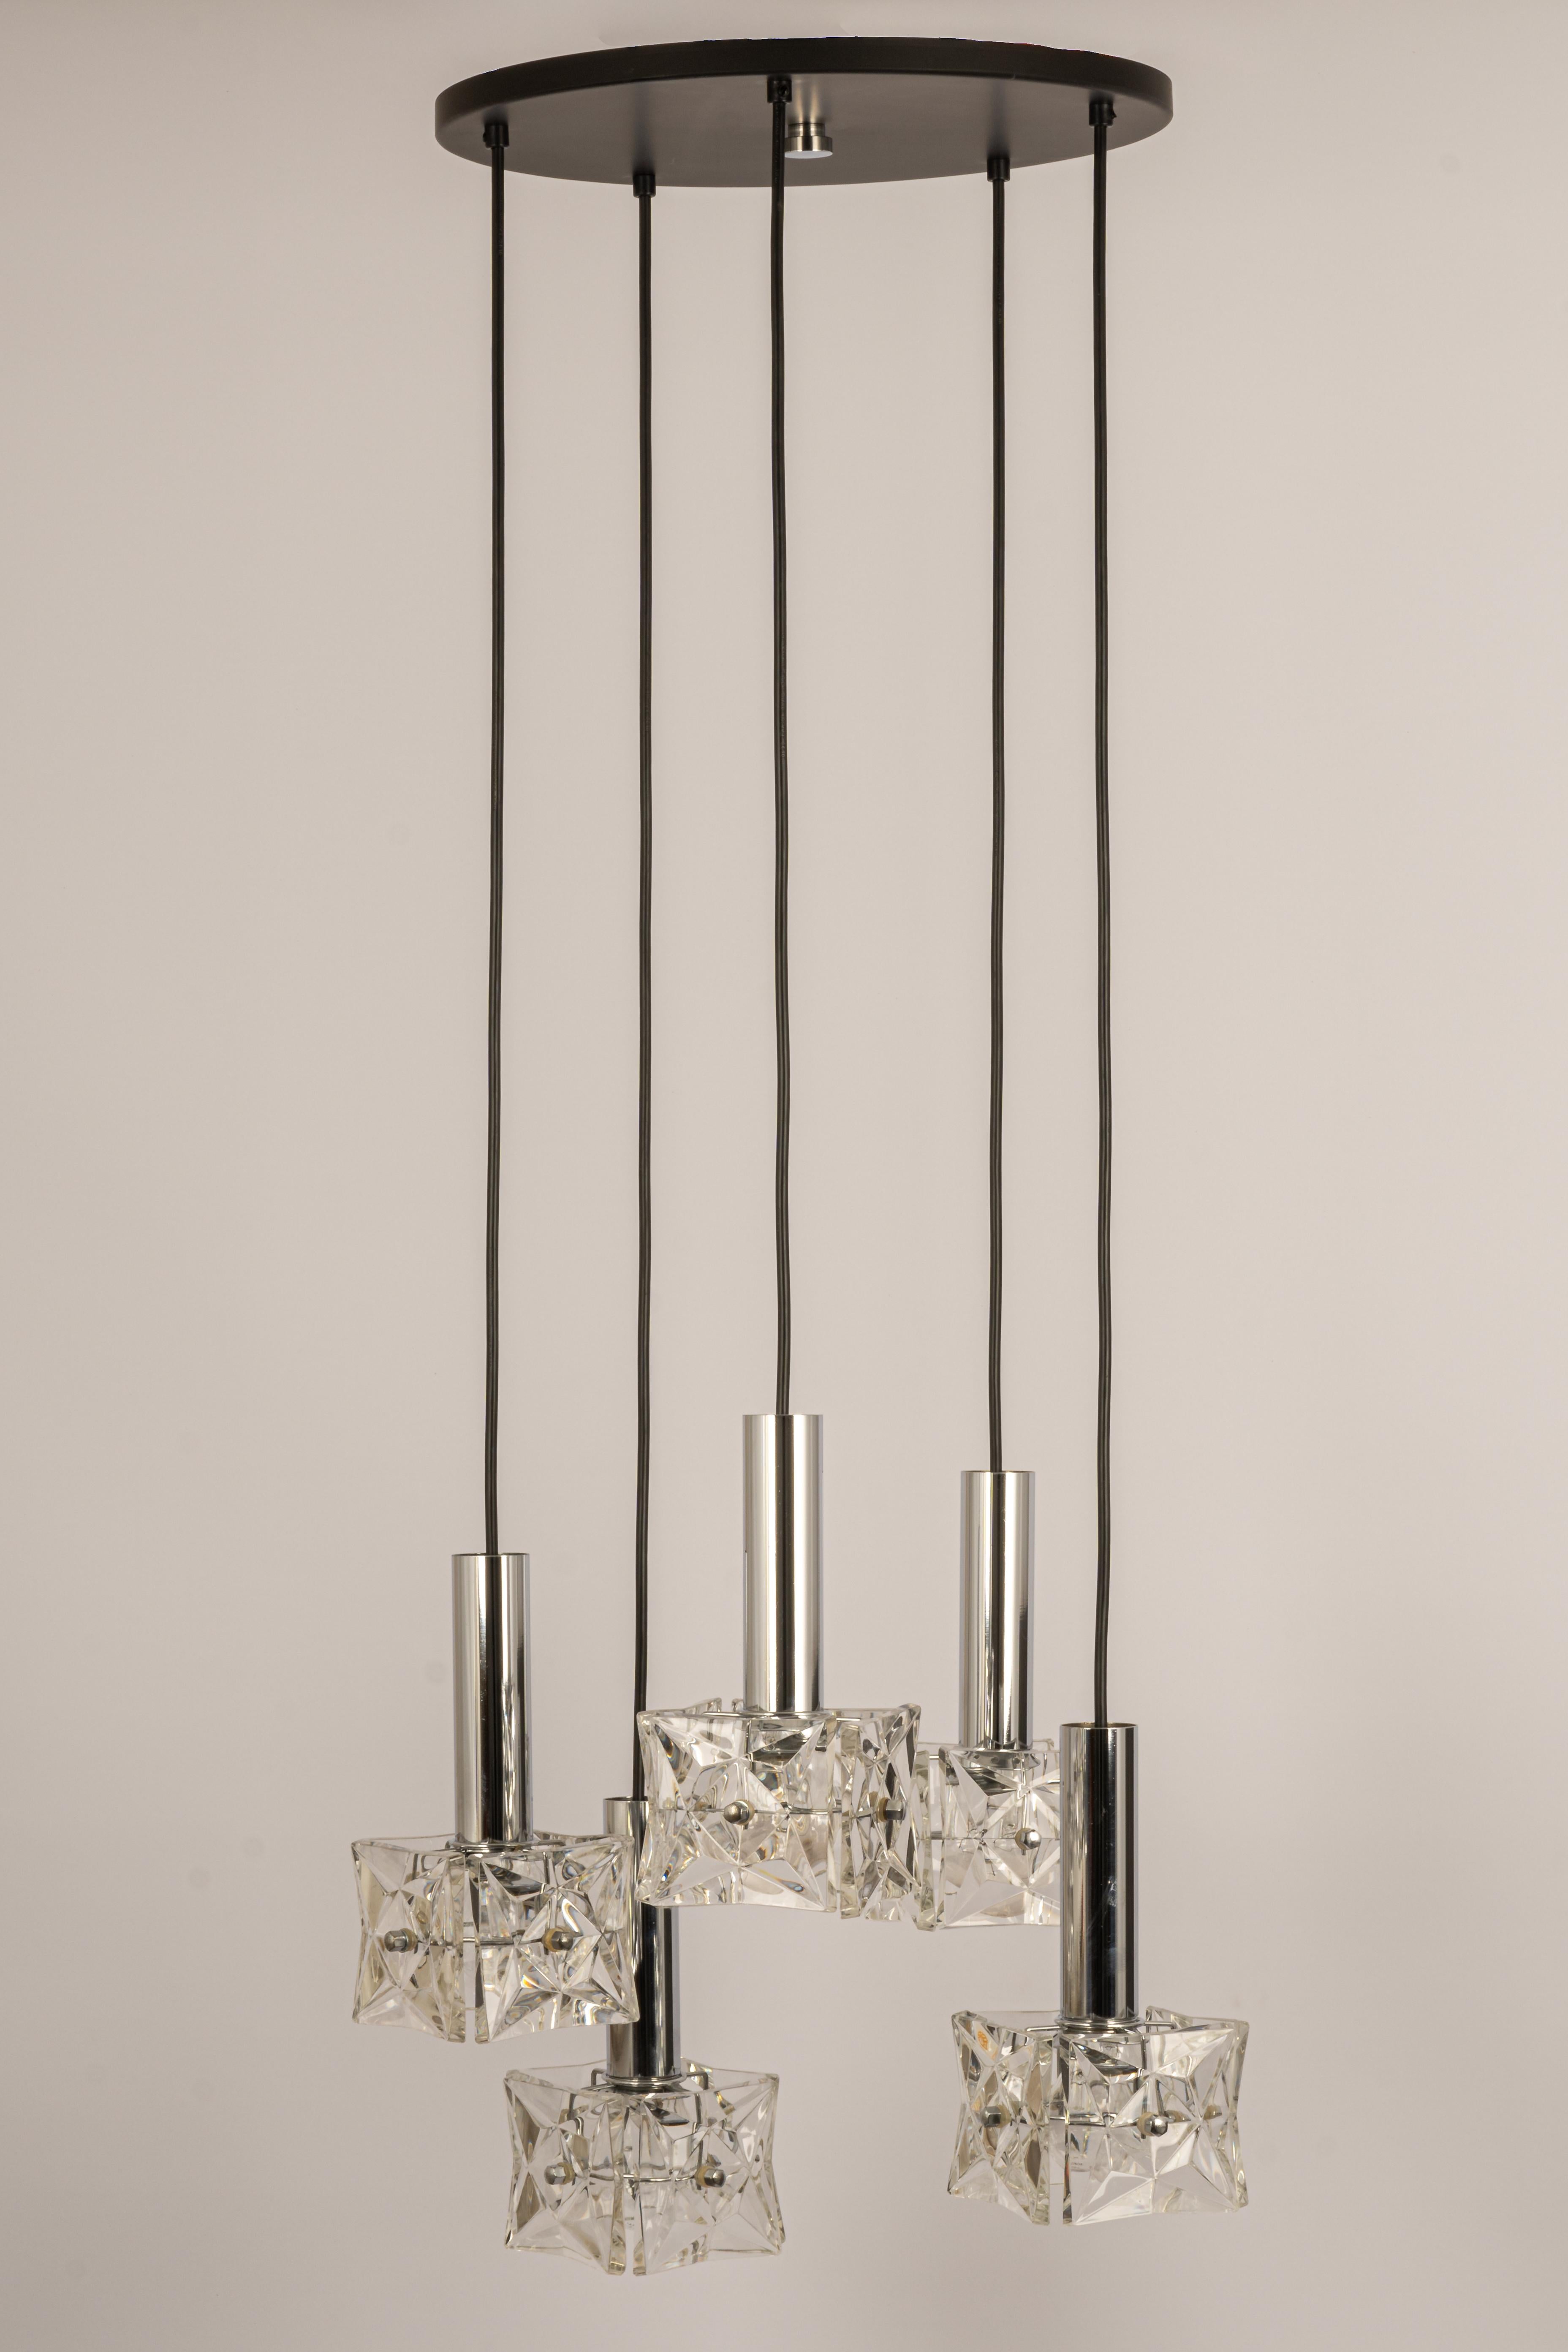 A stunning cascade chandelier made by Kinkeldey, Germany, manufactured in circa 1970-1979. A handmade and high-quality piece. Each frame of the pendants is made of chrome and has 4 facetted crystal glass elements.

Sockets: 5 x E27 standard